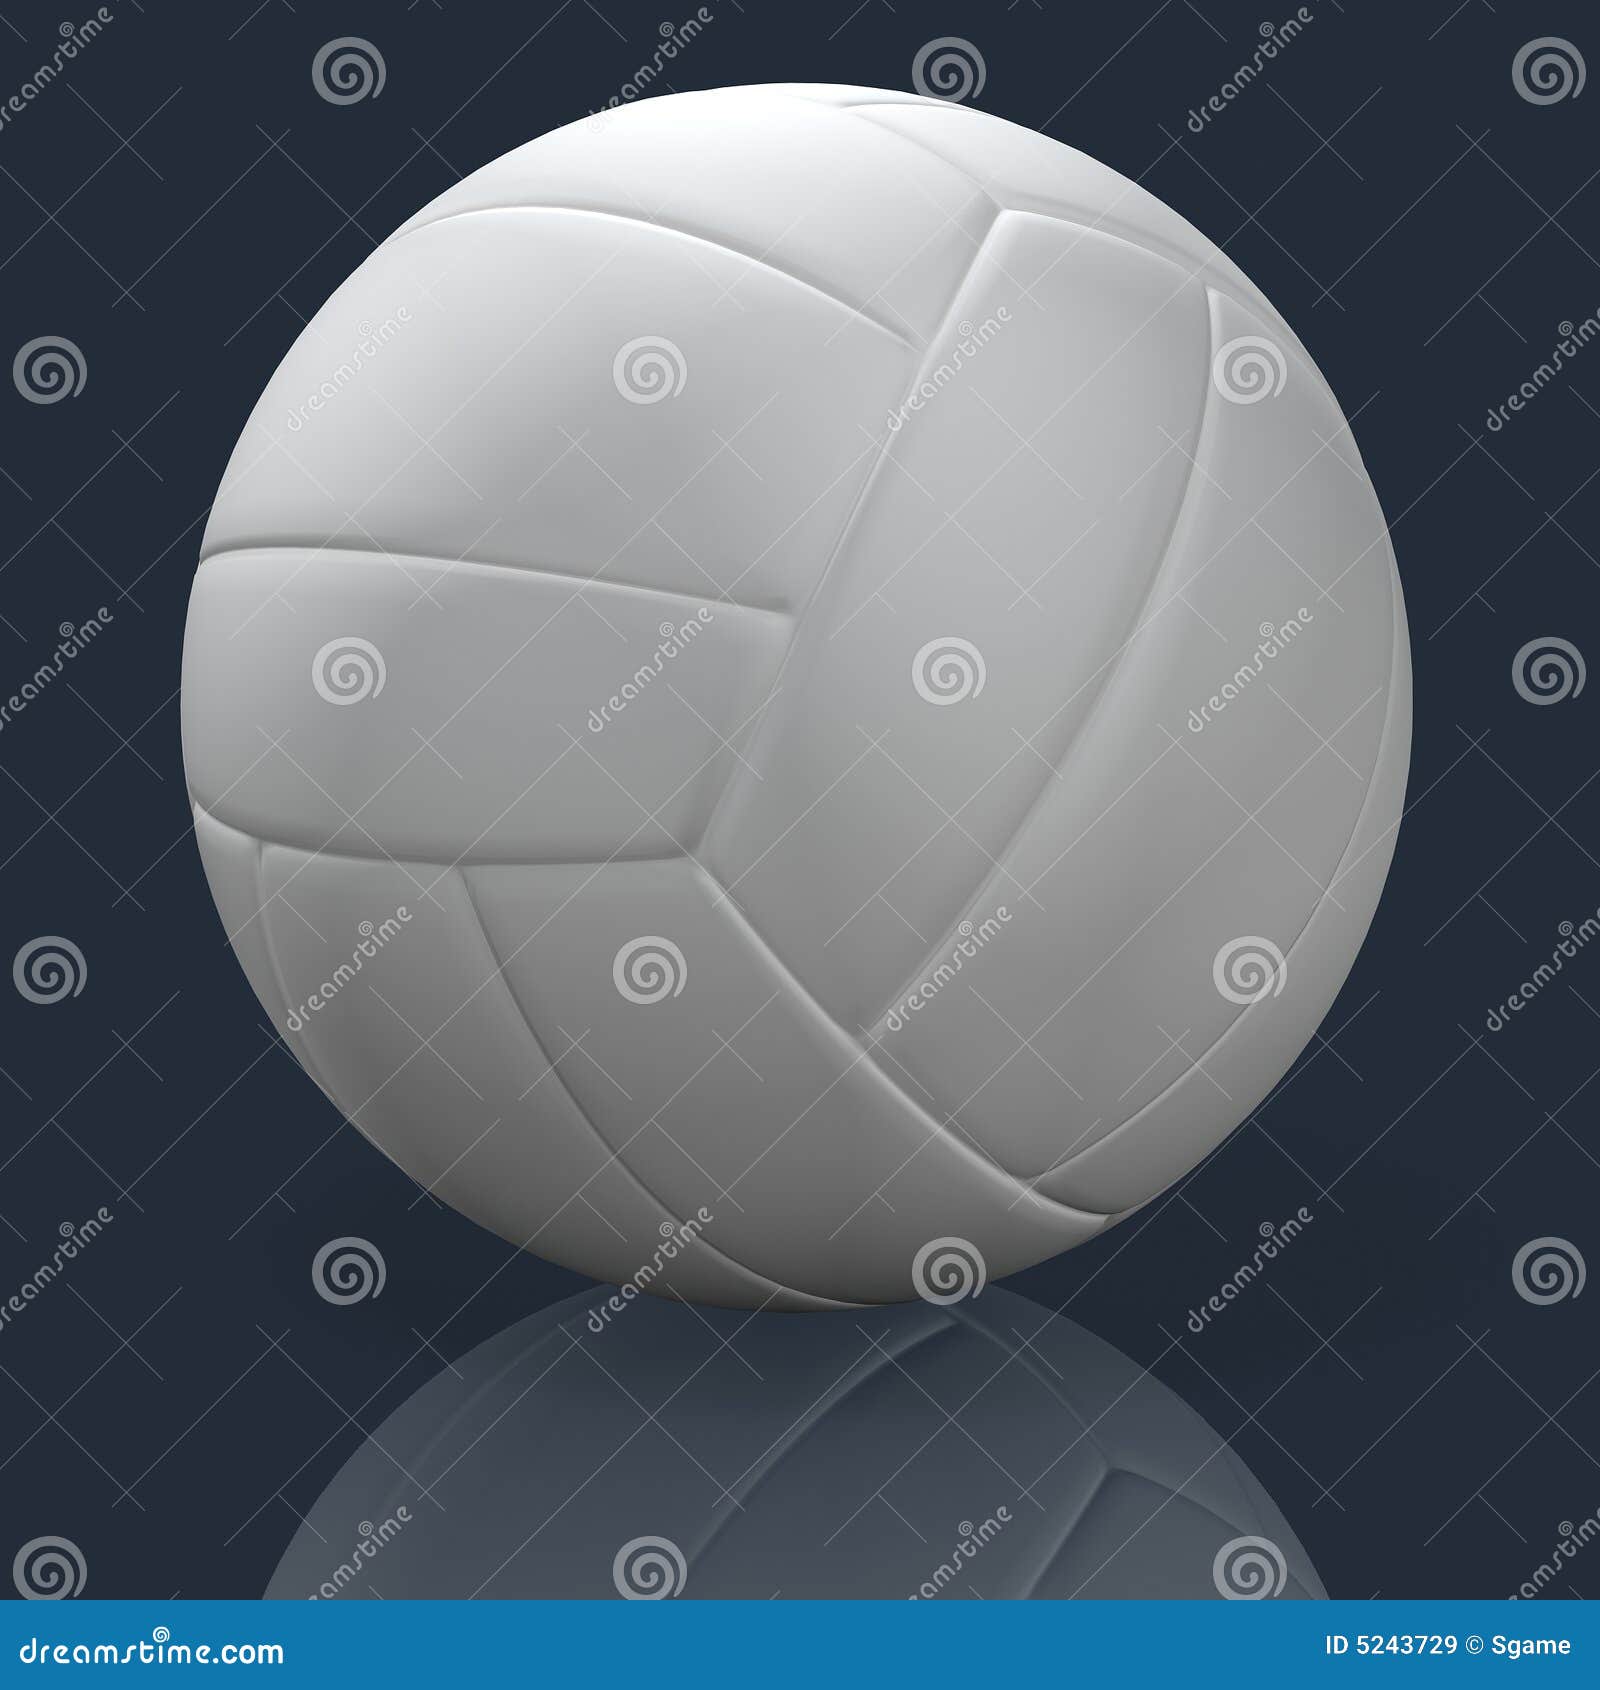 Volleyball On Ground Royalty Free Stock Images - Image: 5243729